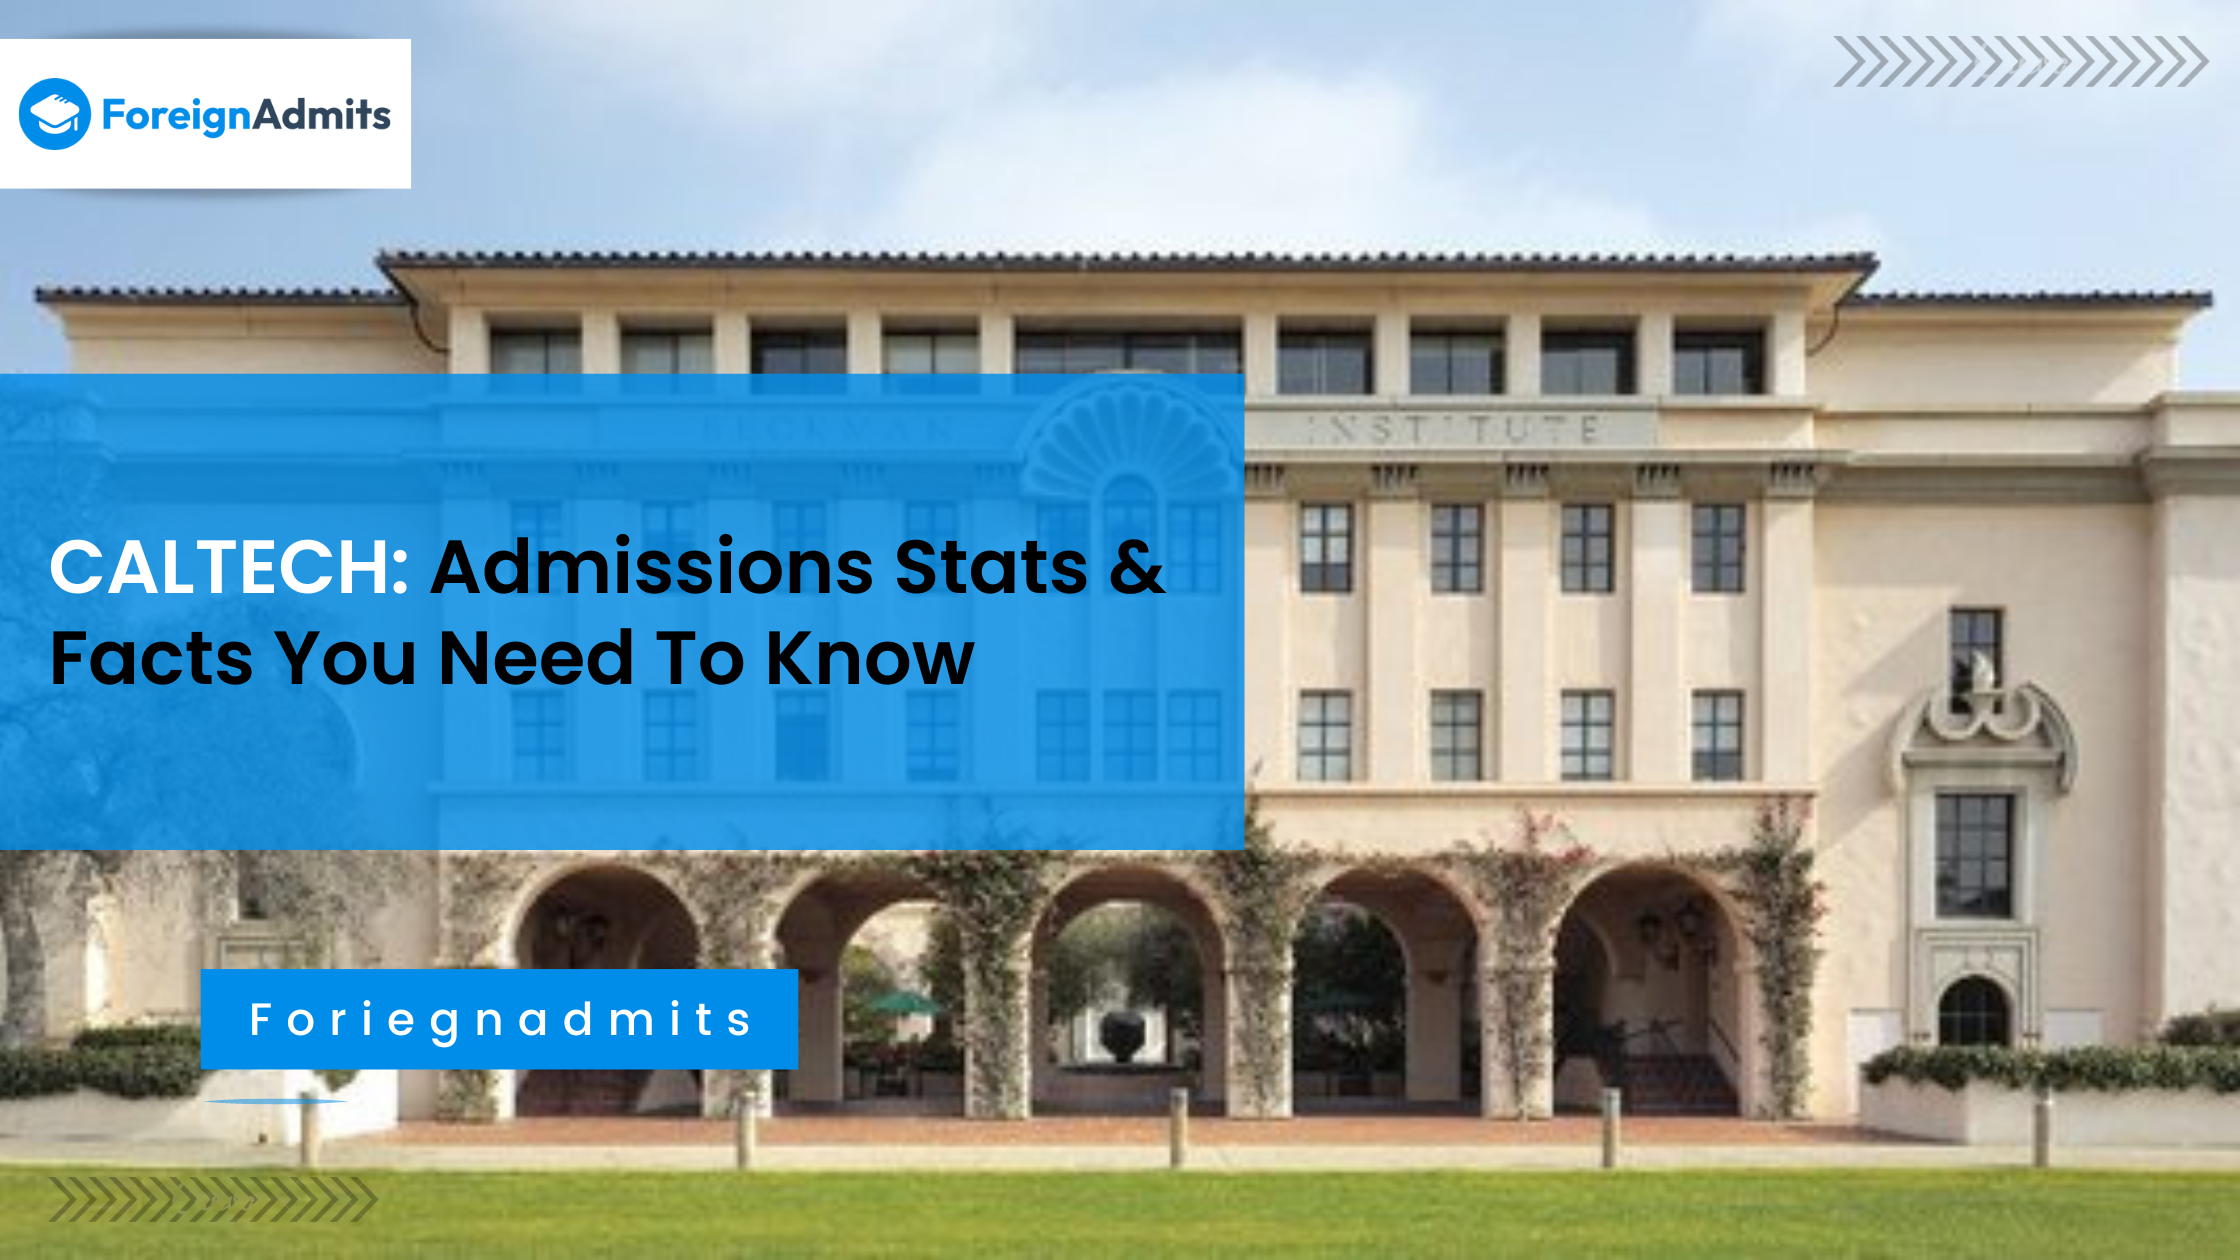 CALTECH: Admissions Stats & Facts You Need To Know